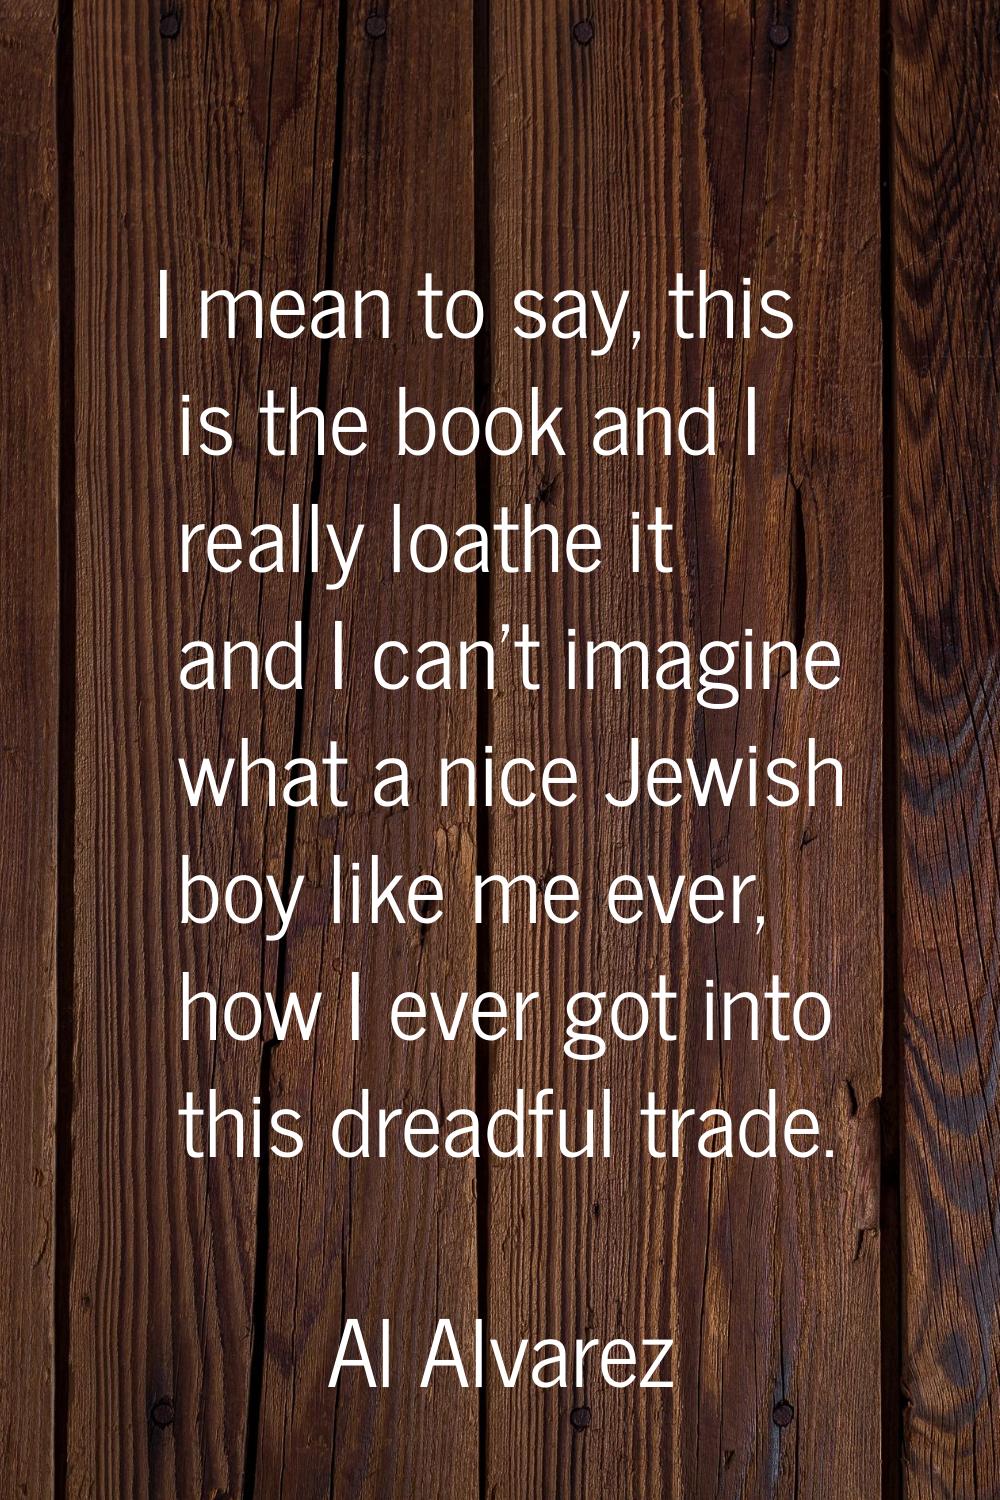 I mean to say, this is the book and I really loathe it and I can't imagine what a nice Jewish boy l